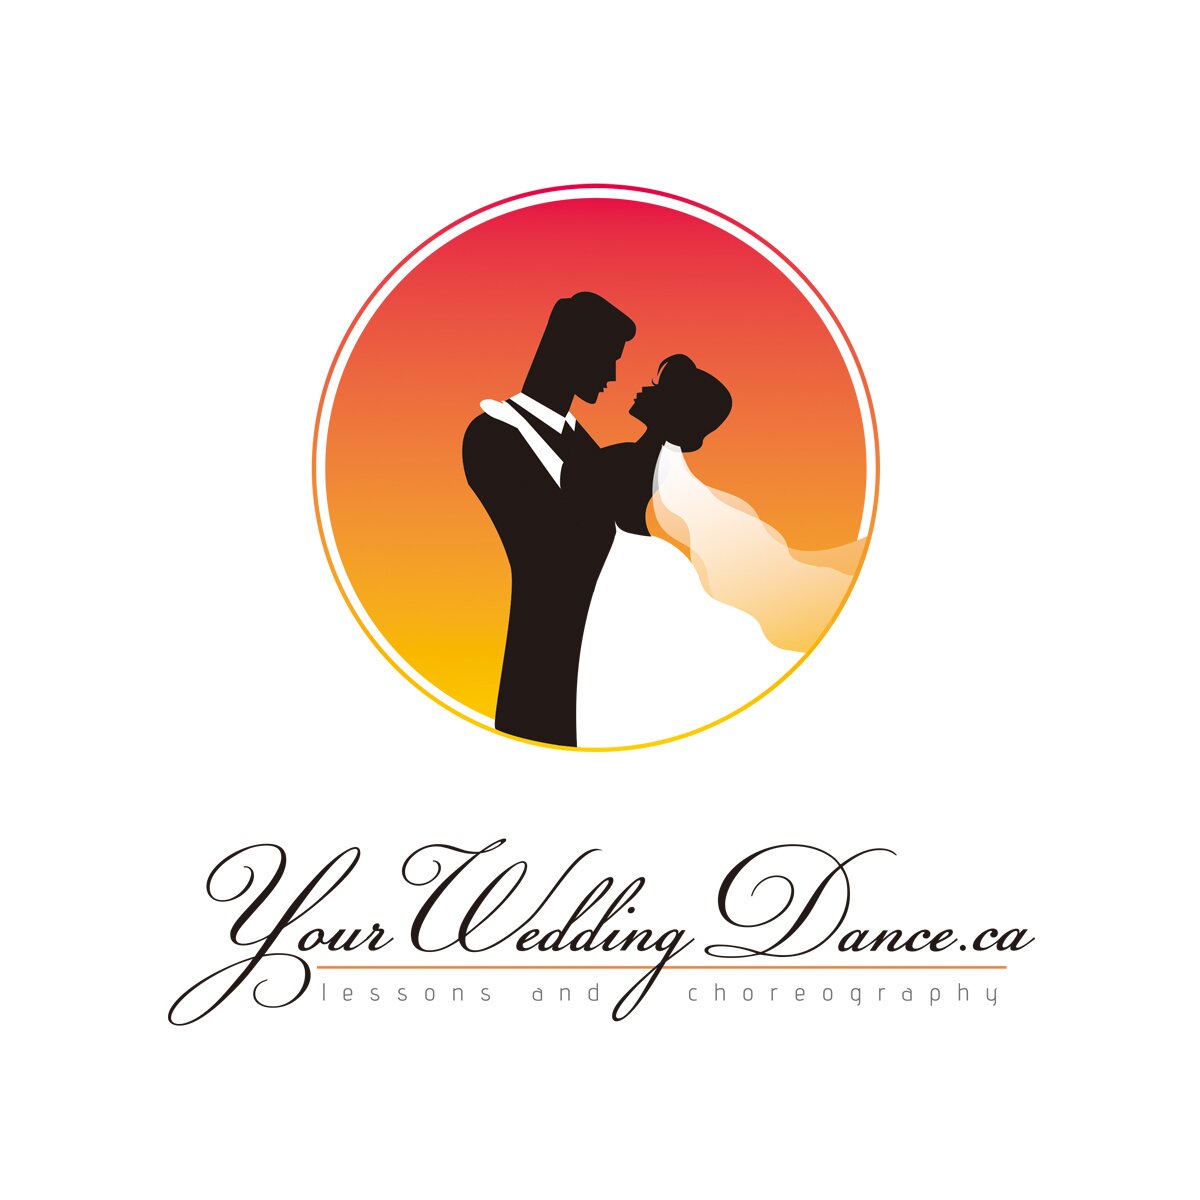 Private wedding first dance choreography & lessons 3711 Chesswood Dr, Toronto, ON M3J 2P6, George 416 358 5595 #weddingdance #firstdance #weddingdancelessons